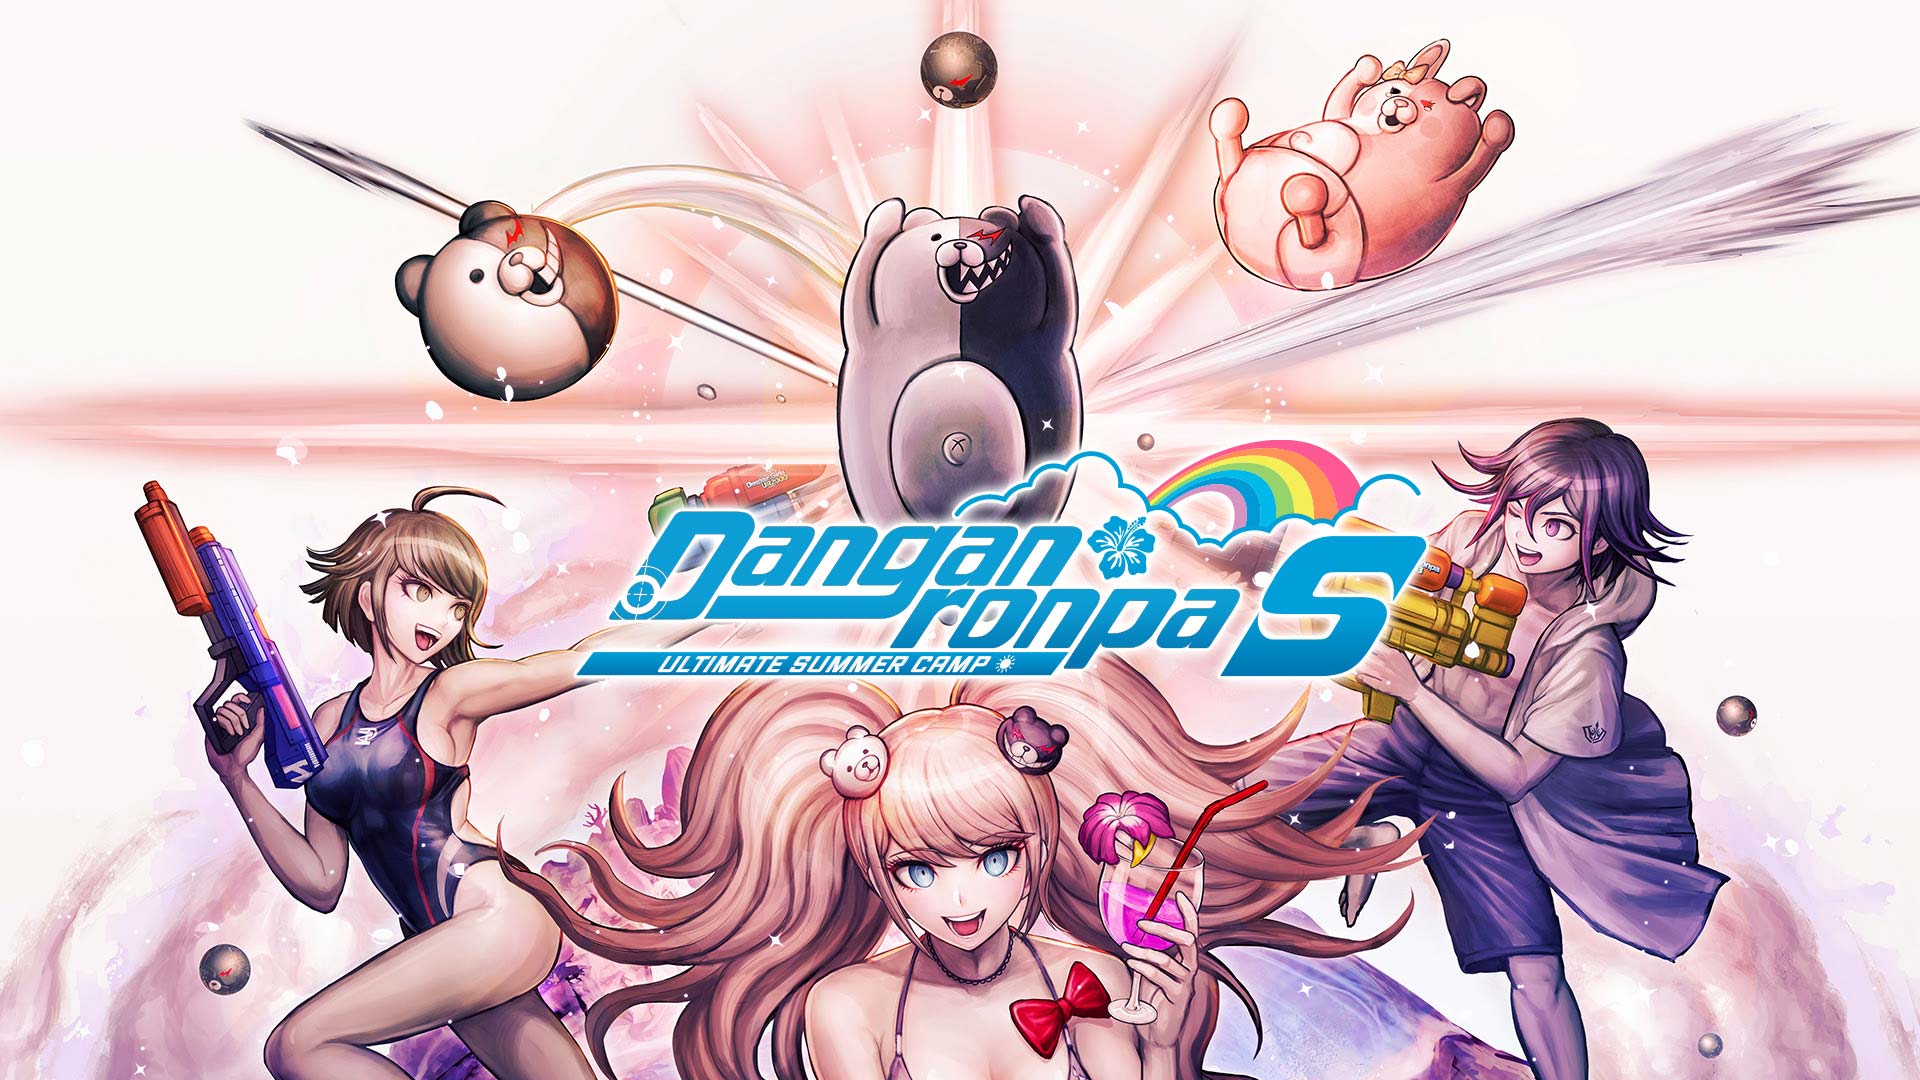 Danganronpa S: Ultimate Summer Camp coming to PC, PS4, Android, iOS